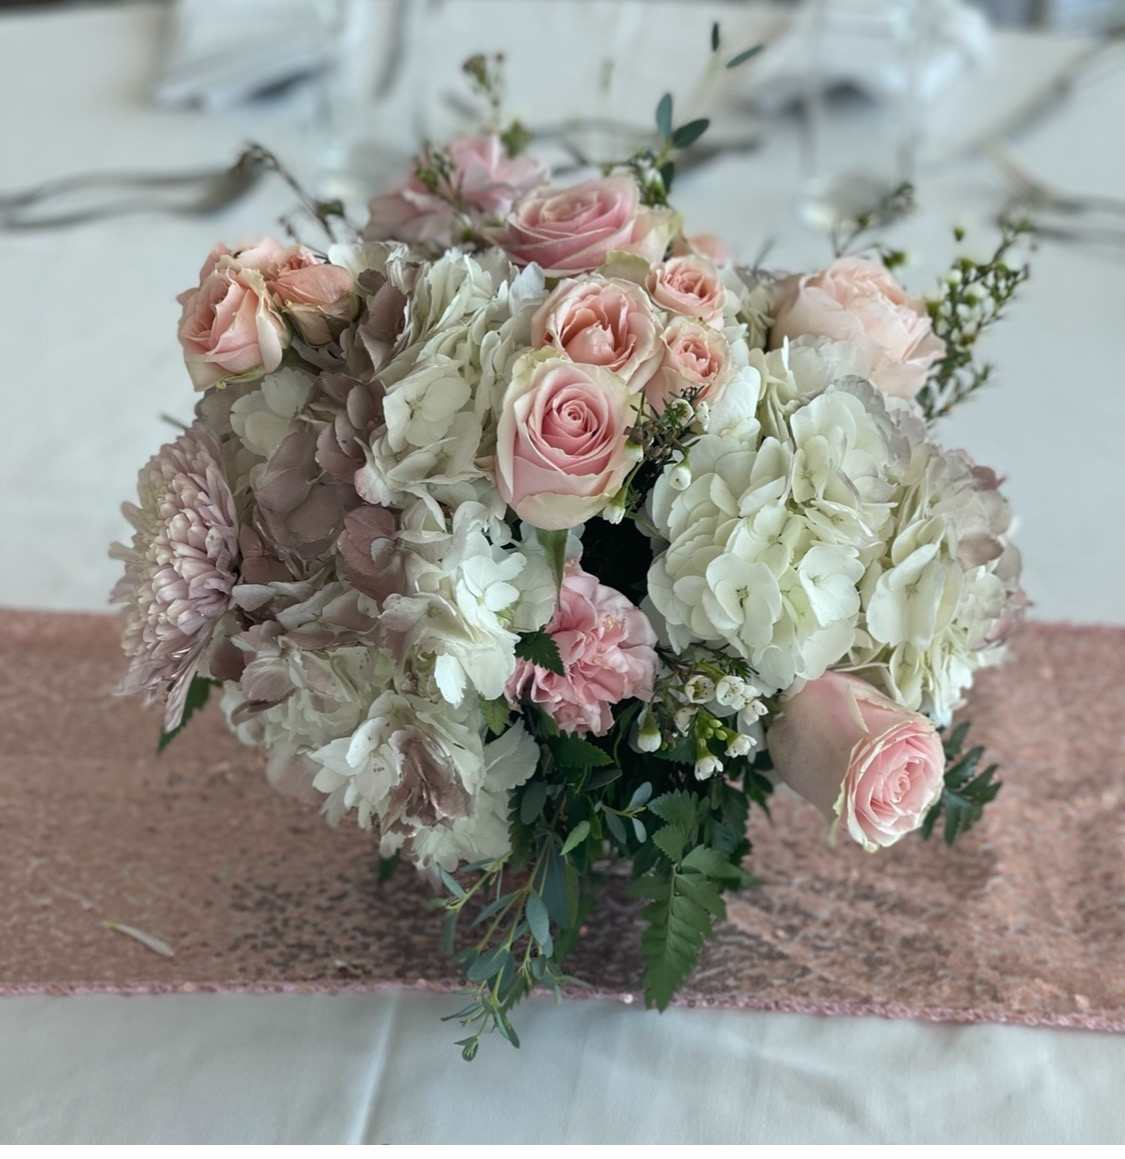 Blush Crush - It's just, a little blush! Whoever you're sending this bouquet to, your loved ones are sure to crush hard on these gorgeous pink and white shades. 